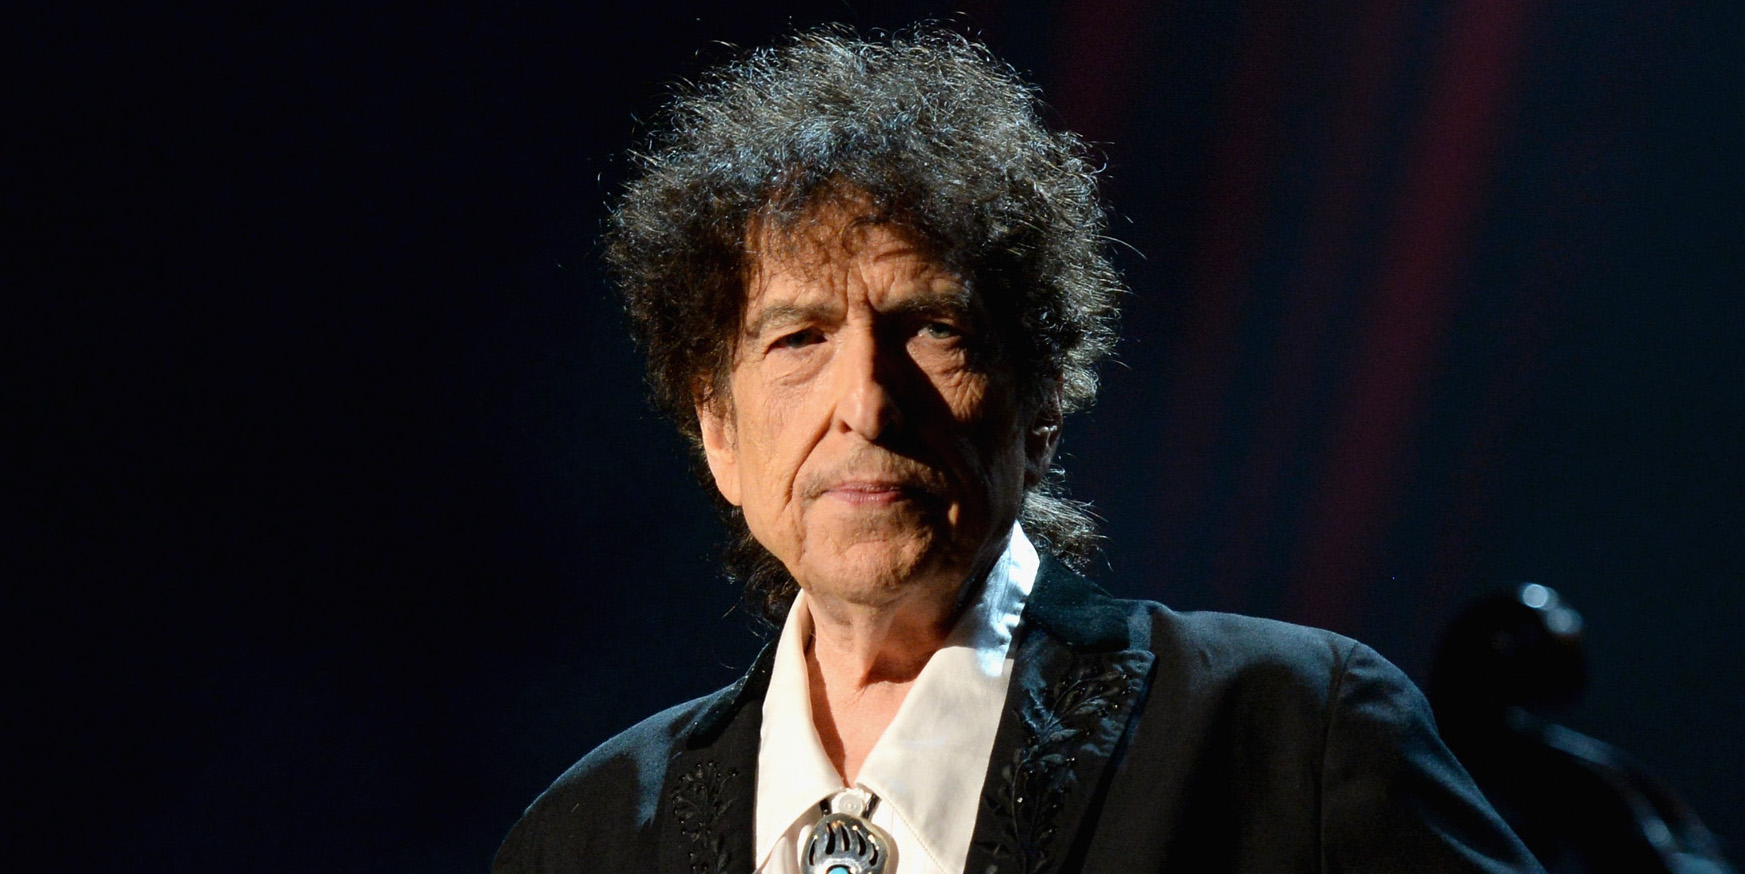 Bob Dylan (American Singer-Songwriter) - Songs, Prize, Net Worth, Albums, Tour